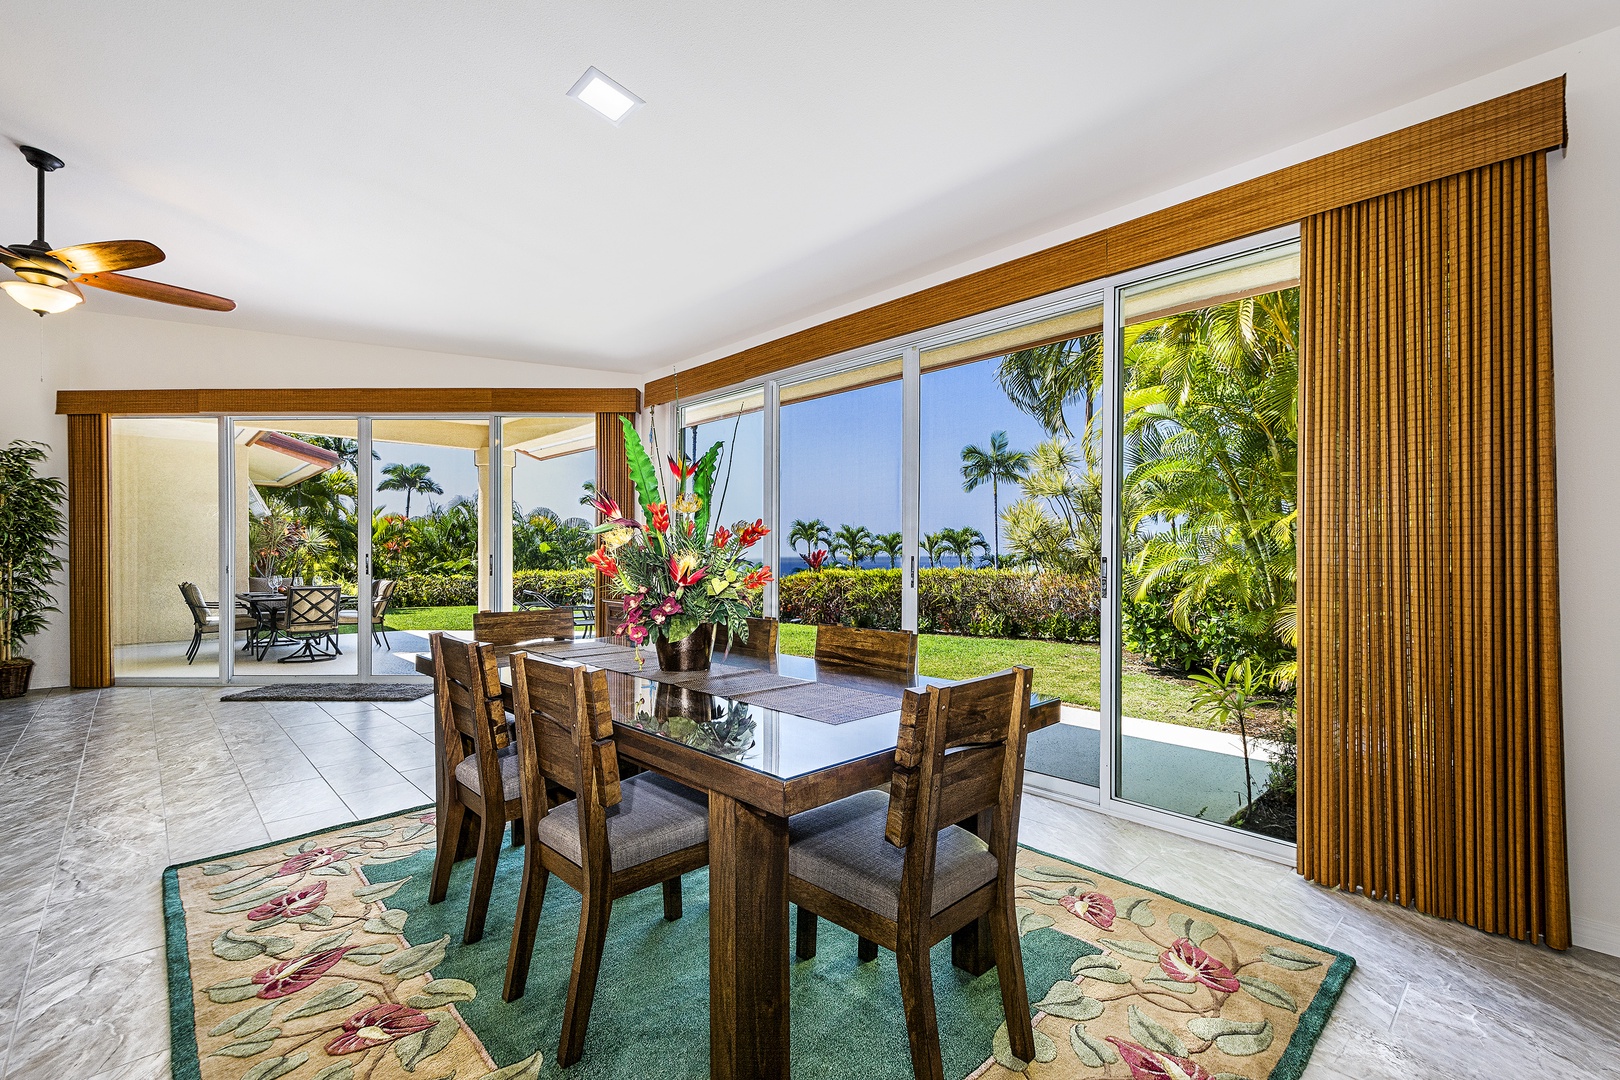 Kailua Kona Vacation Rentals, Maile Hale - Sliding doors on the ocean side bring nature into the dining room